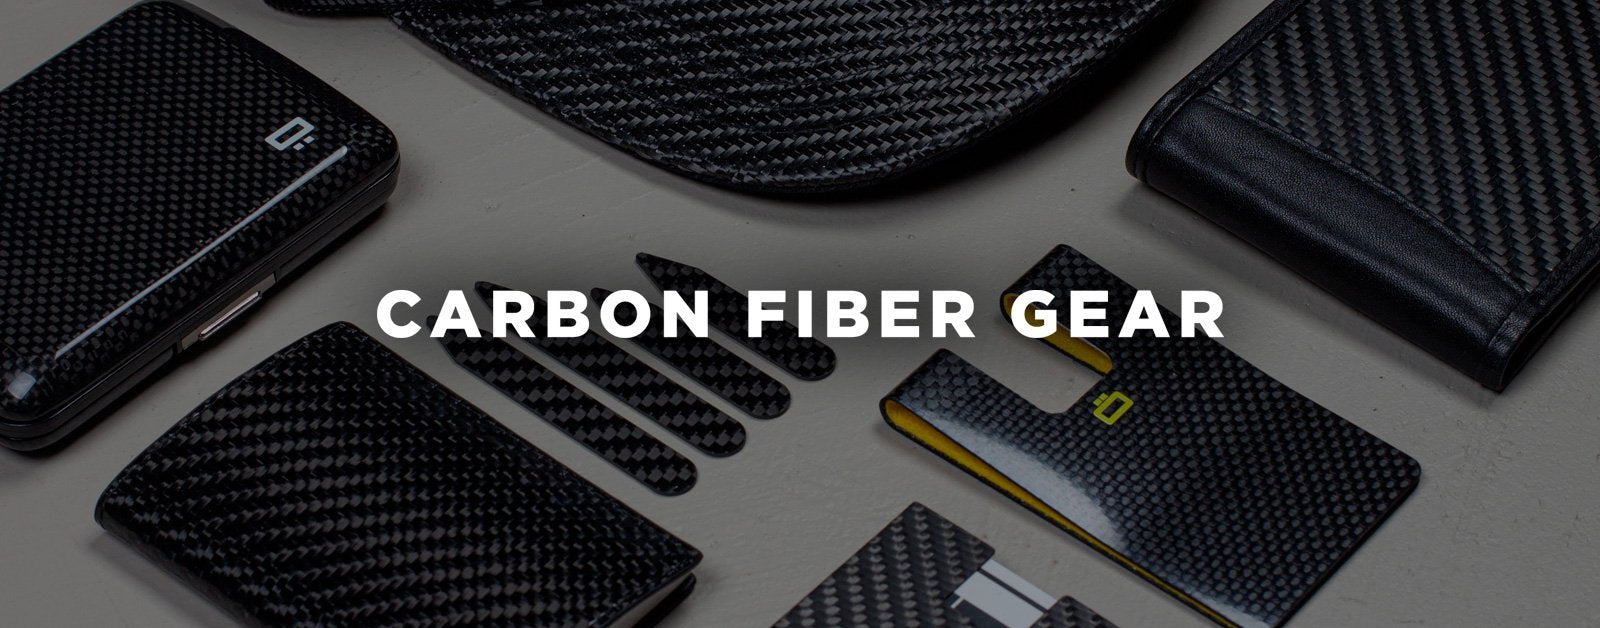 Carbon Fiber Gear - REAL Carbon Fiber Accessories, Gifts, and More